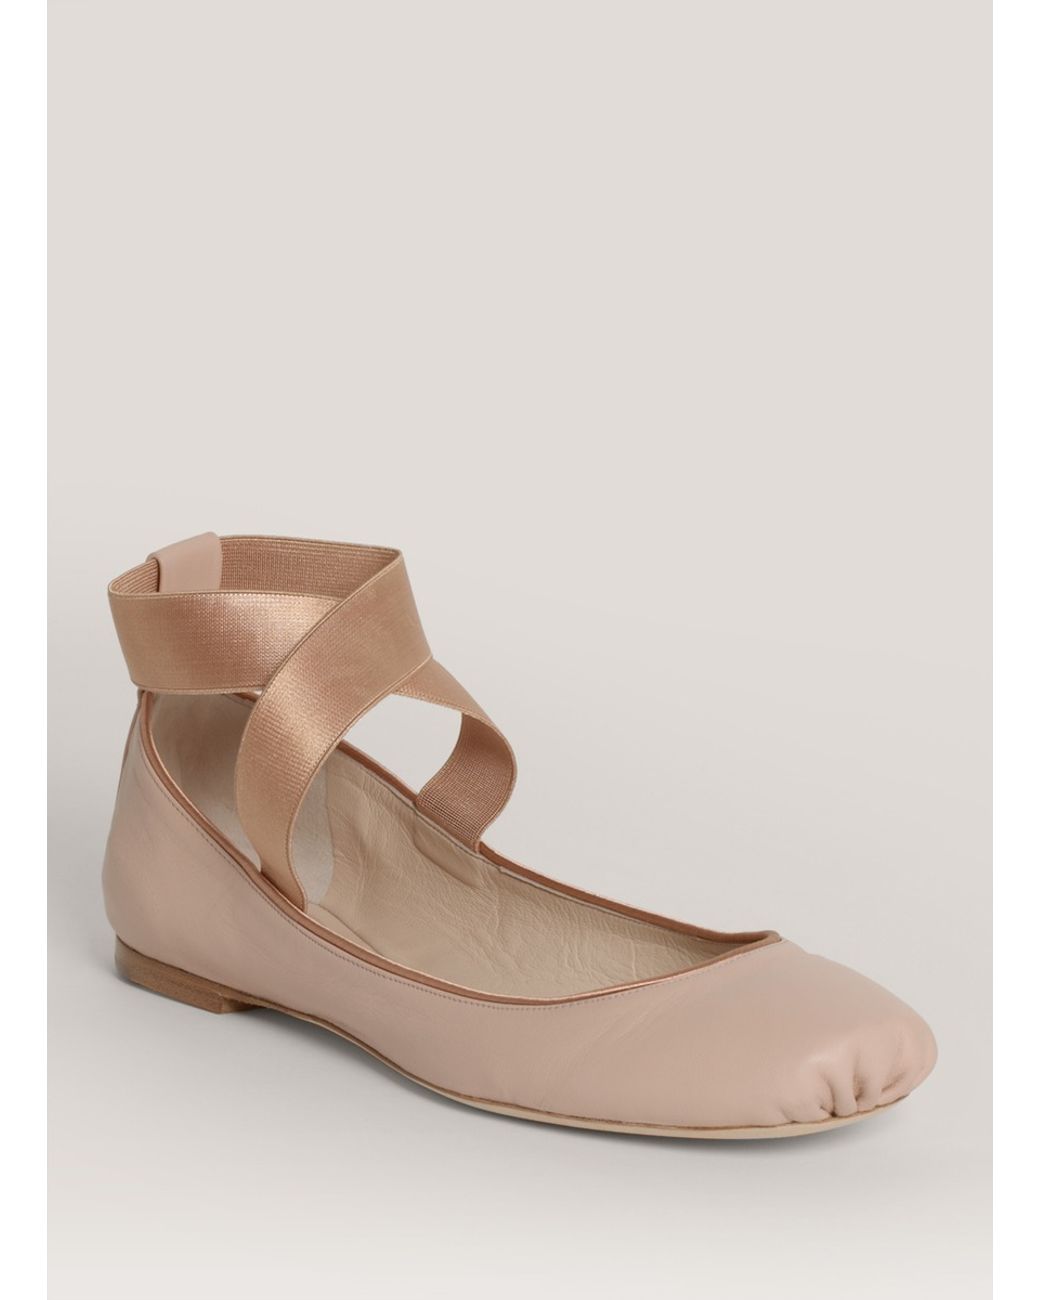 Strap Flats in Natural | Lyst